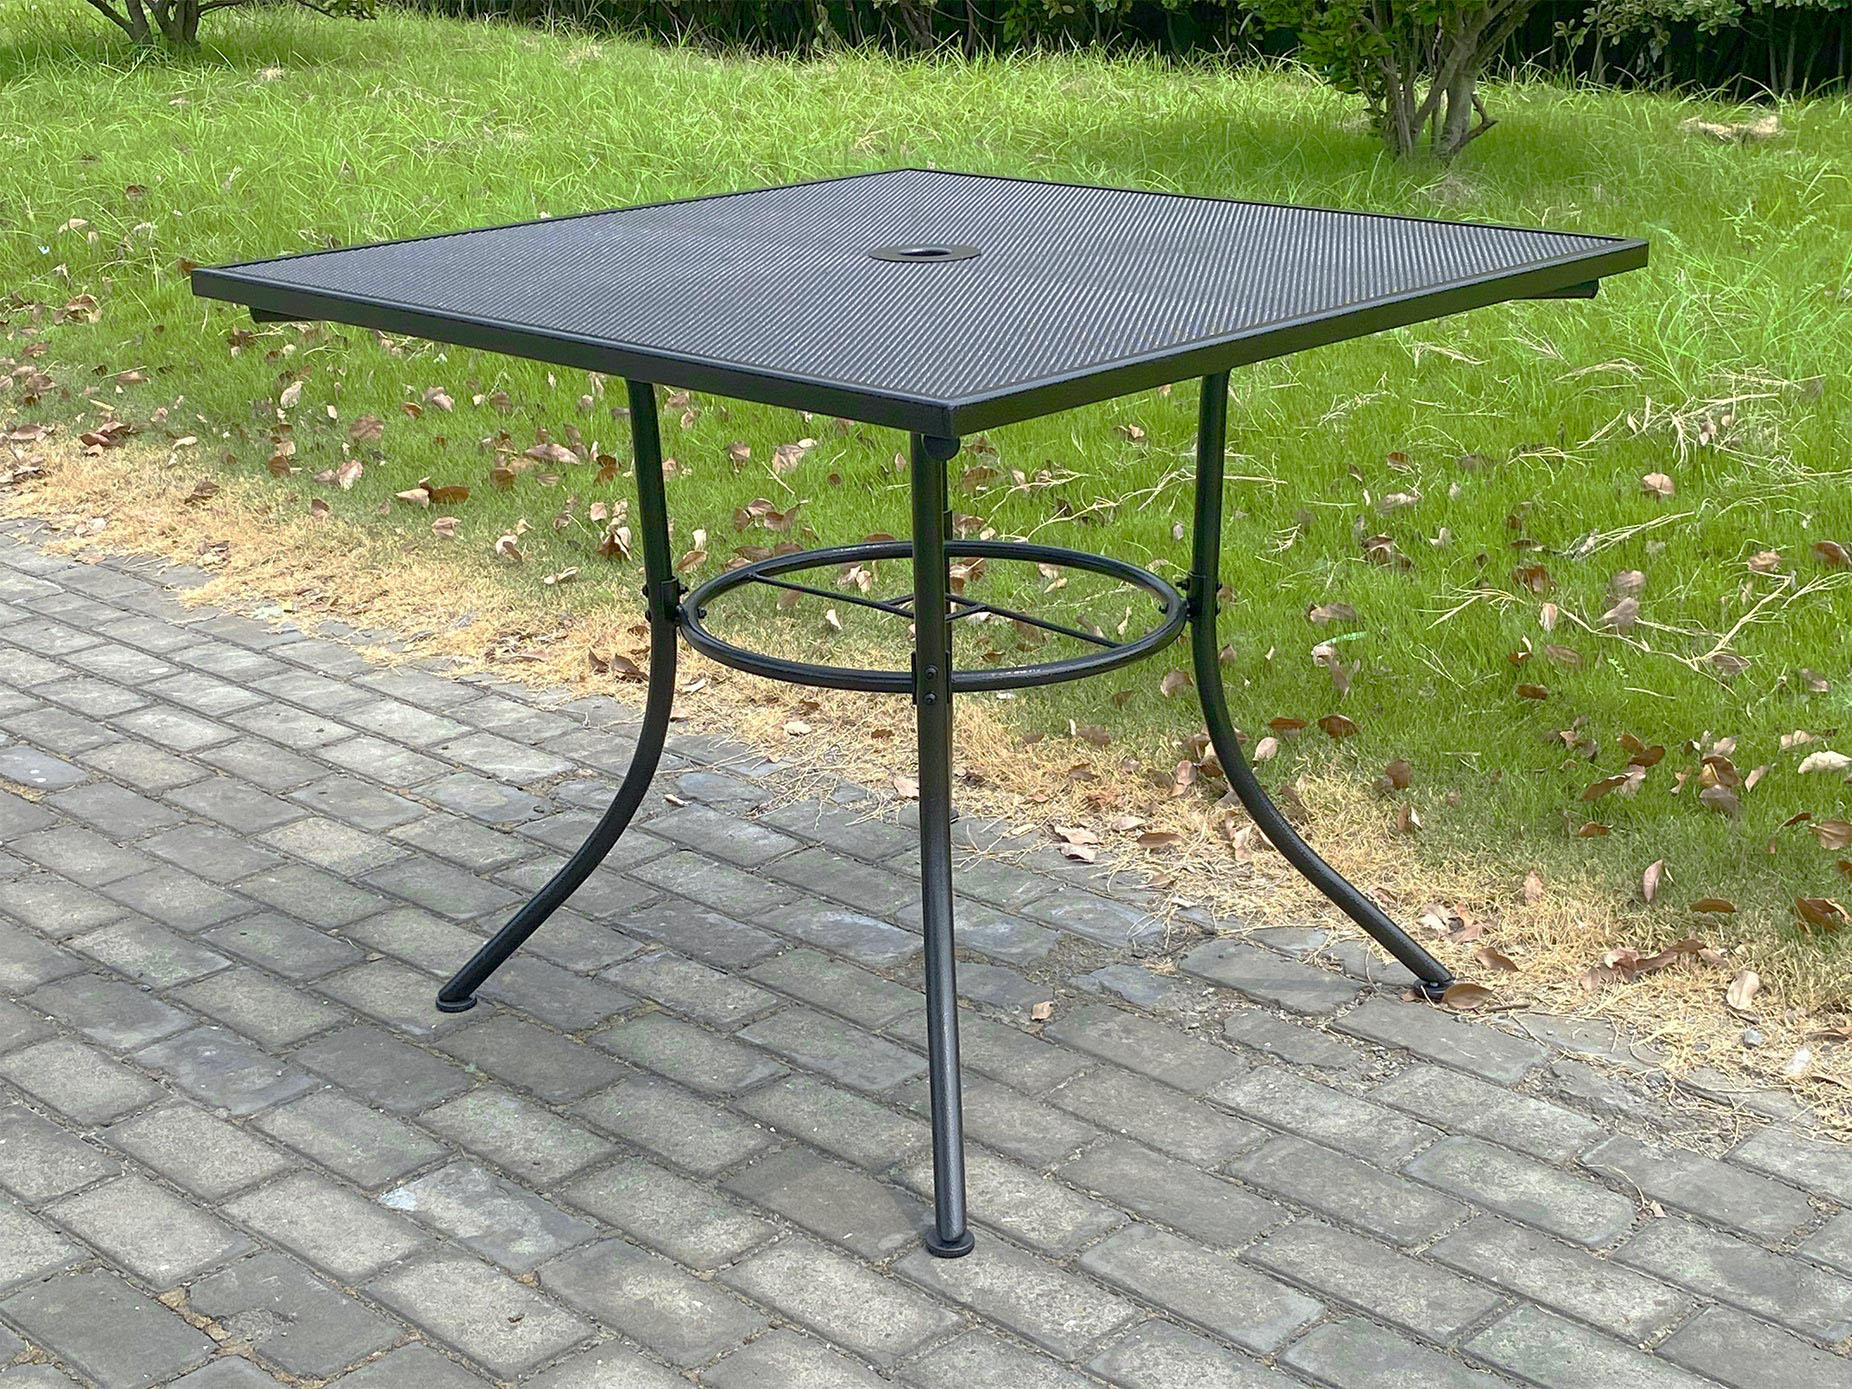 36” Square Table 29”H